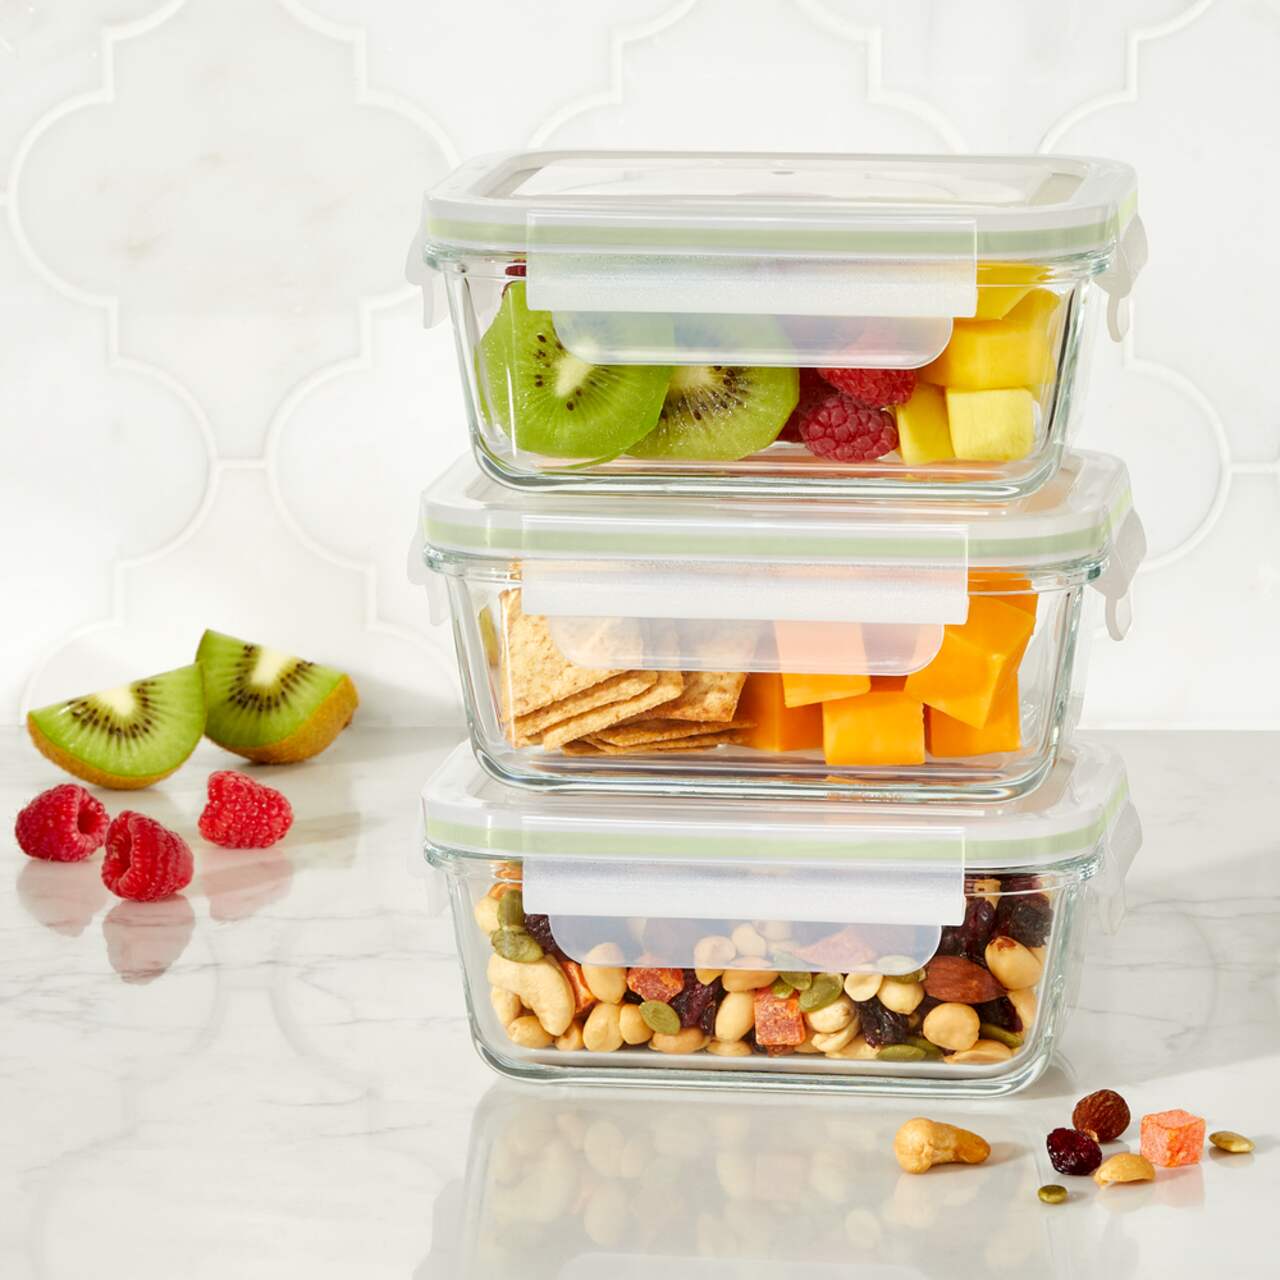 https://media-www.canadiantire.ca/product/living/kitchen/food-storage/1424975/vida-by-paderno-6-piece-485ml-glass-clip-lid-food-storage-ec1b0c61-38d4-4a13-bfed-1918ce877053.png?imdensity=1&imwidth=1244&impolicy=mZoom